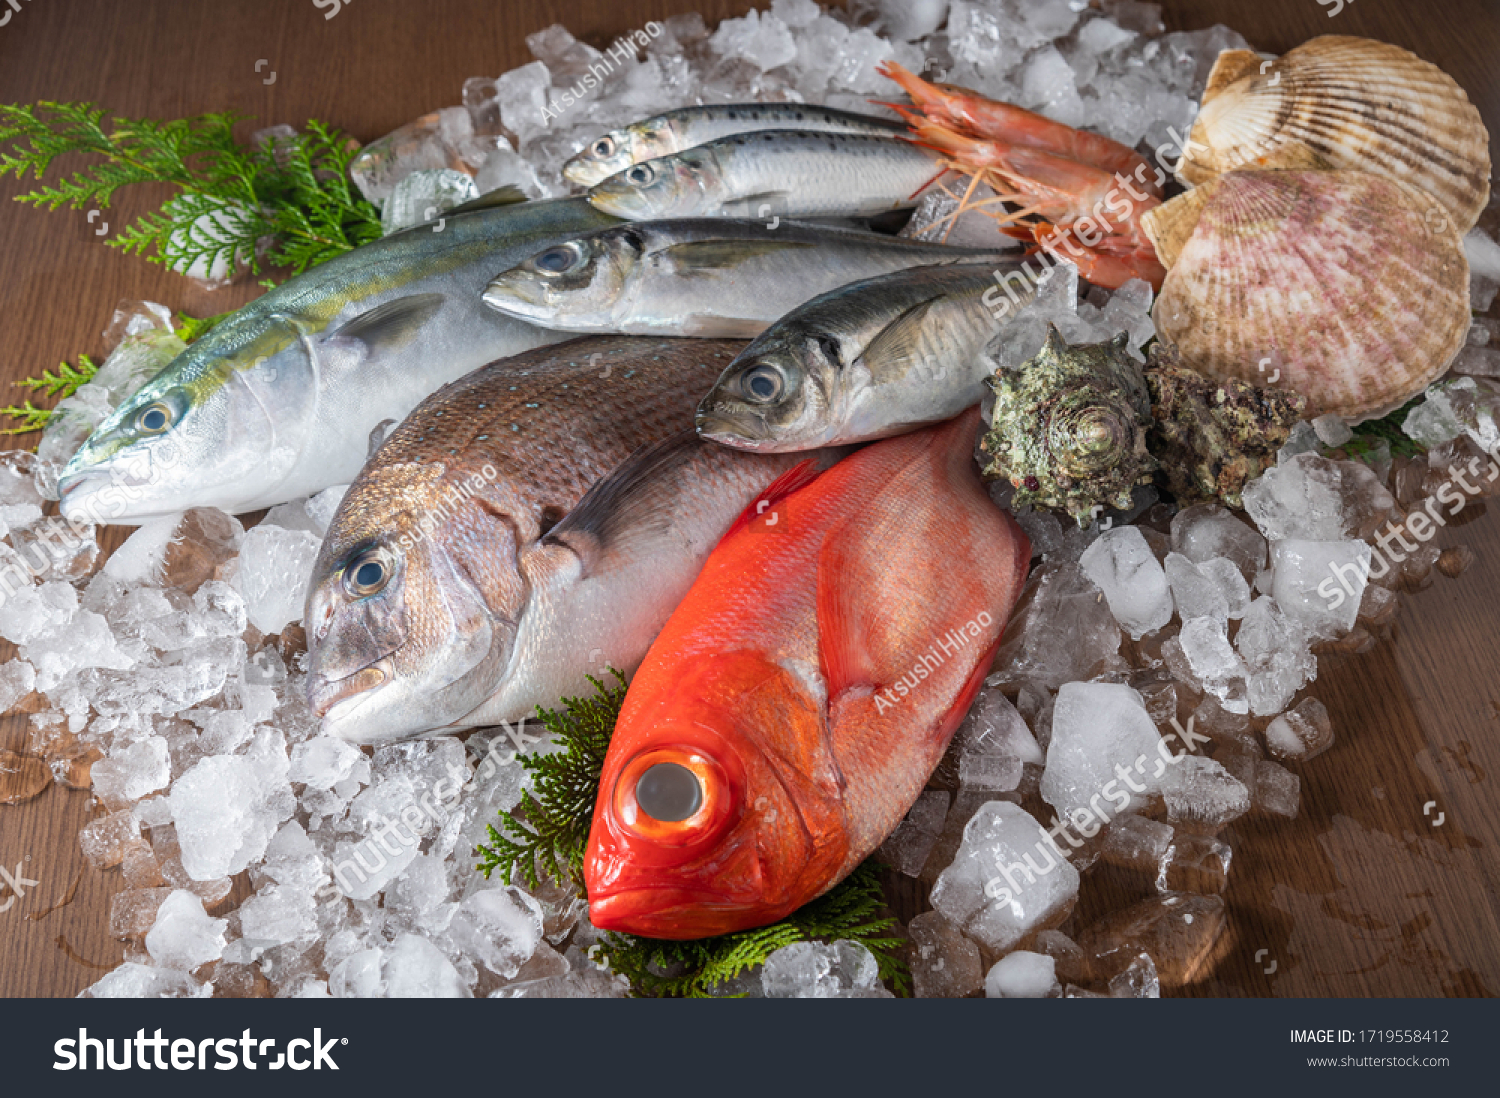 japanese fresh fishes and crustacean on ice
 #1719558412